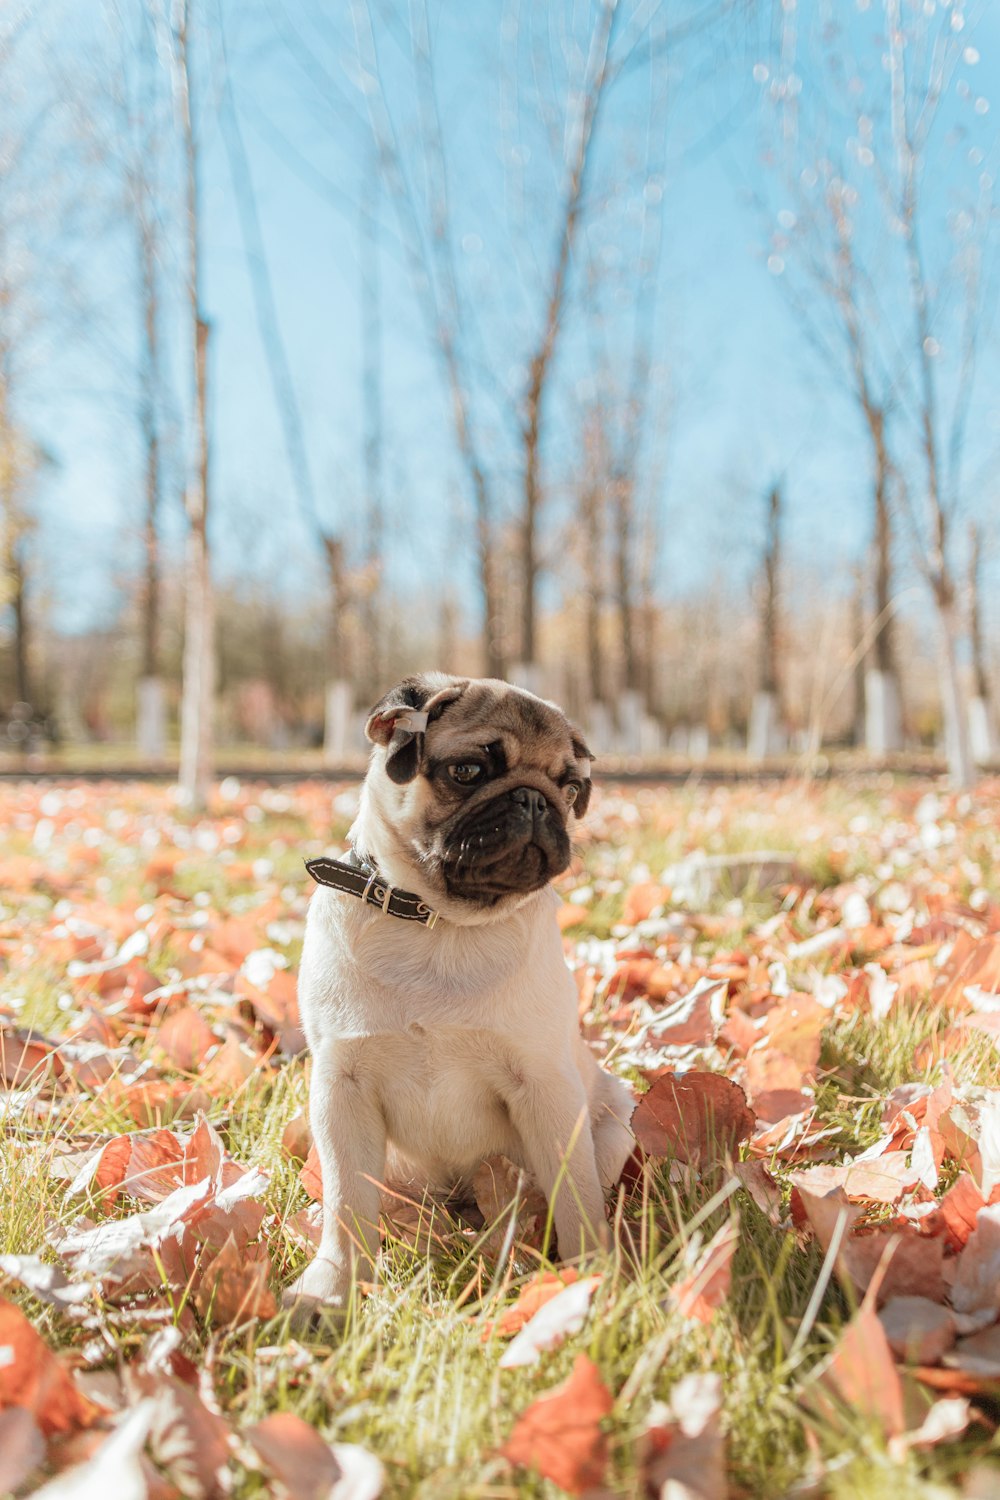 fawn pug sitting on brown dried leaves during daytime